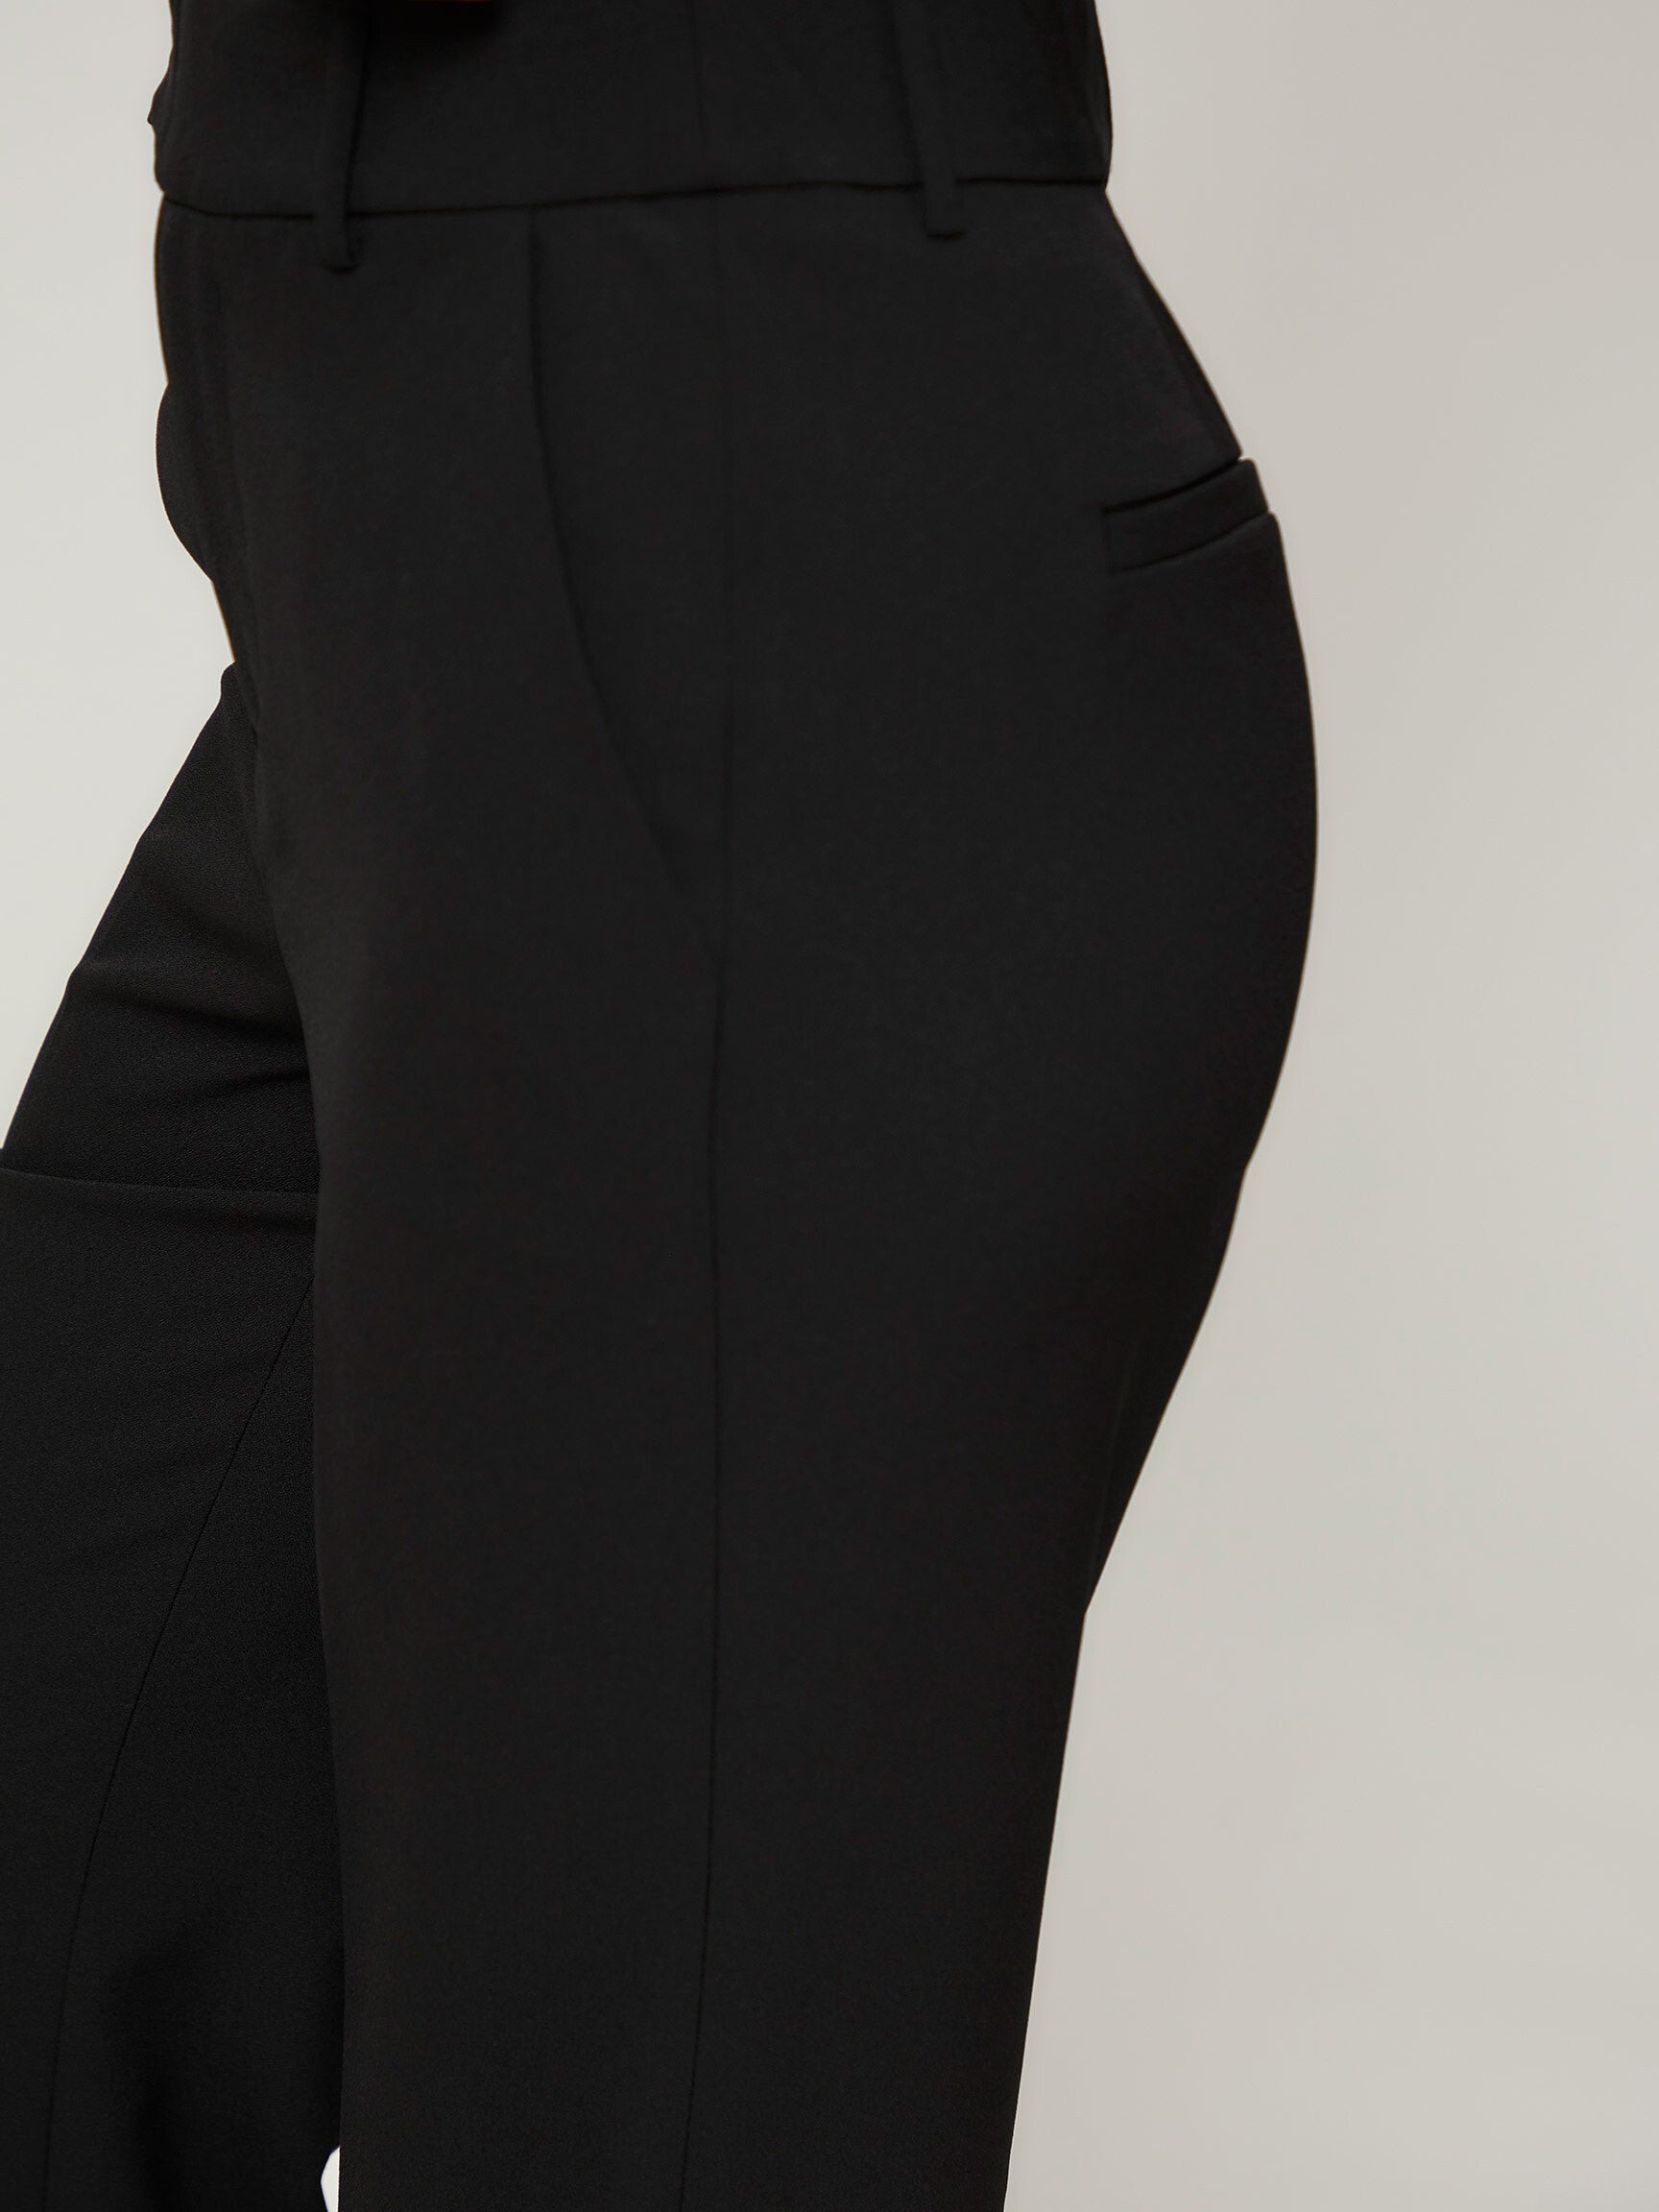 Co'Couture - Vola Pant